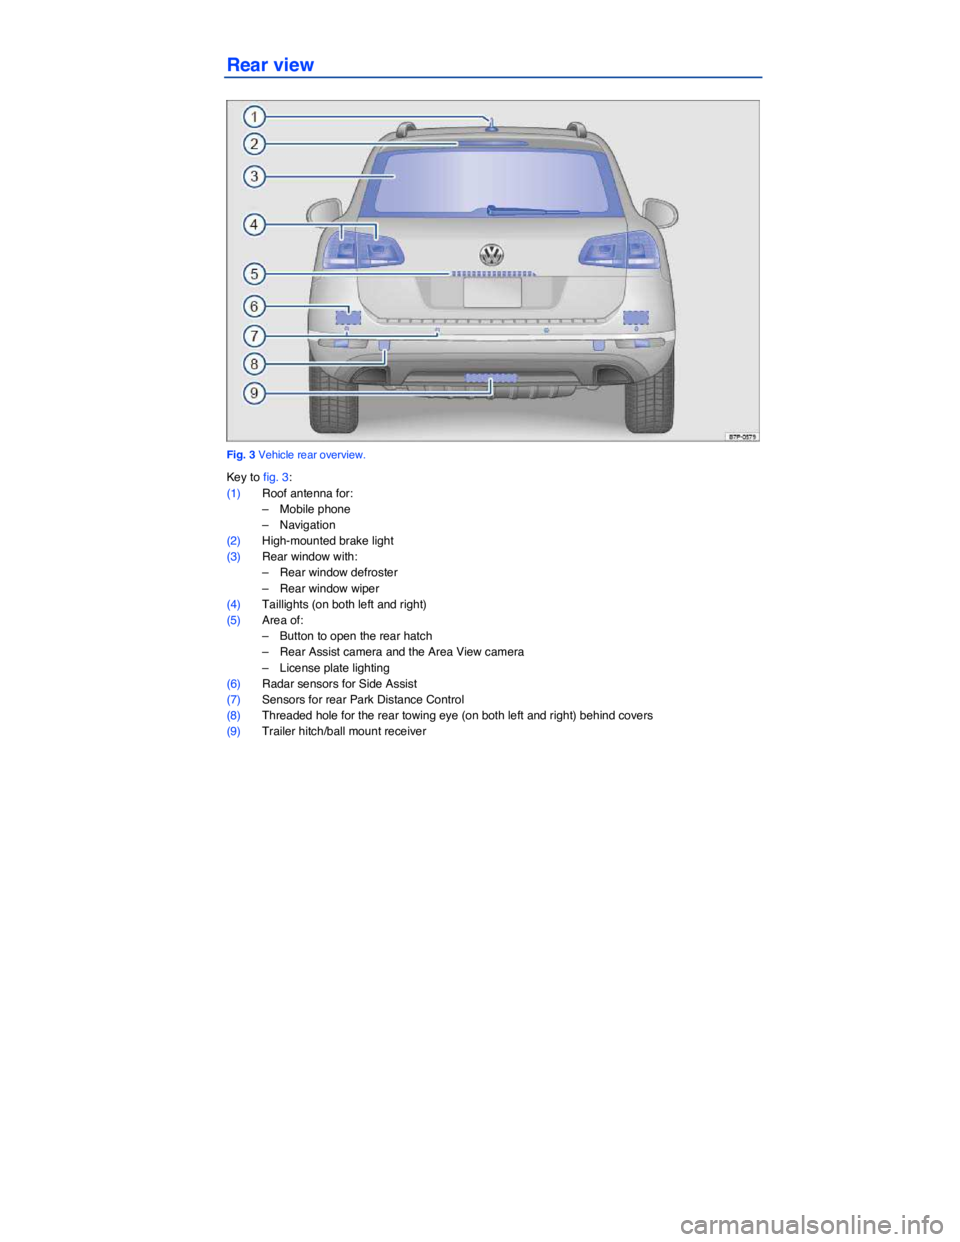 VOLKSWAGEN TOUAREG 2017  Owner´s Manual  
Rear view 
 
Fig. 3 Vehicle rear overview. 
Key to fig. 3: 
(1) Roof antenna for:  
–  Mobile phone  
–  Navigation  
(2) High-mounted brake light  
(3) Rear window with: 
–  Rear window defro